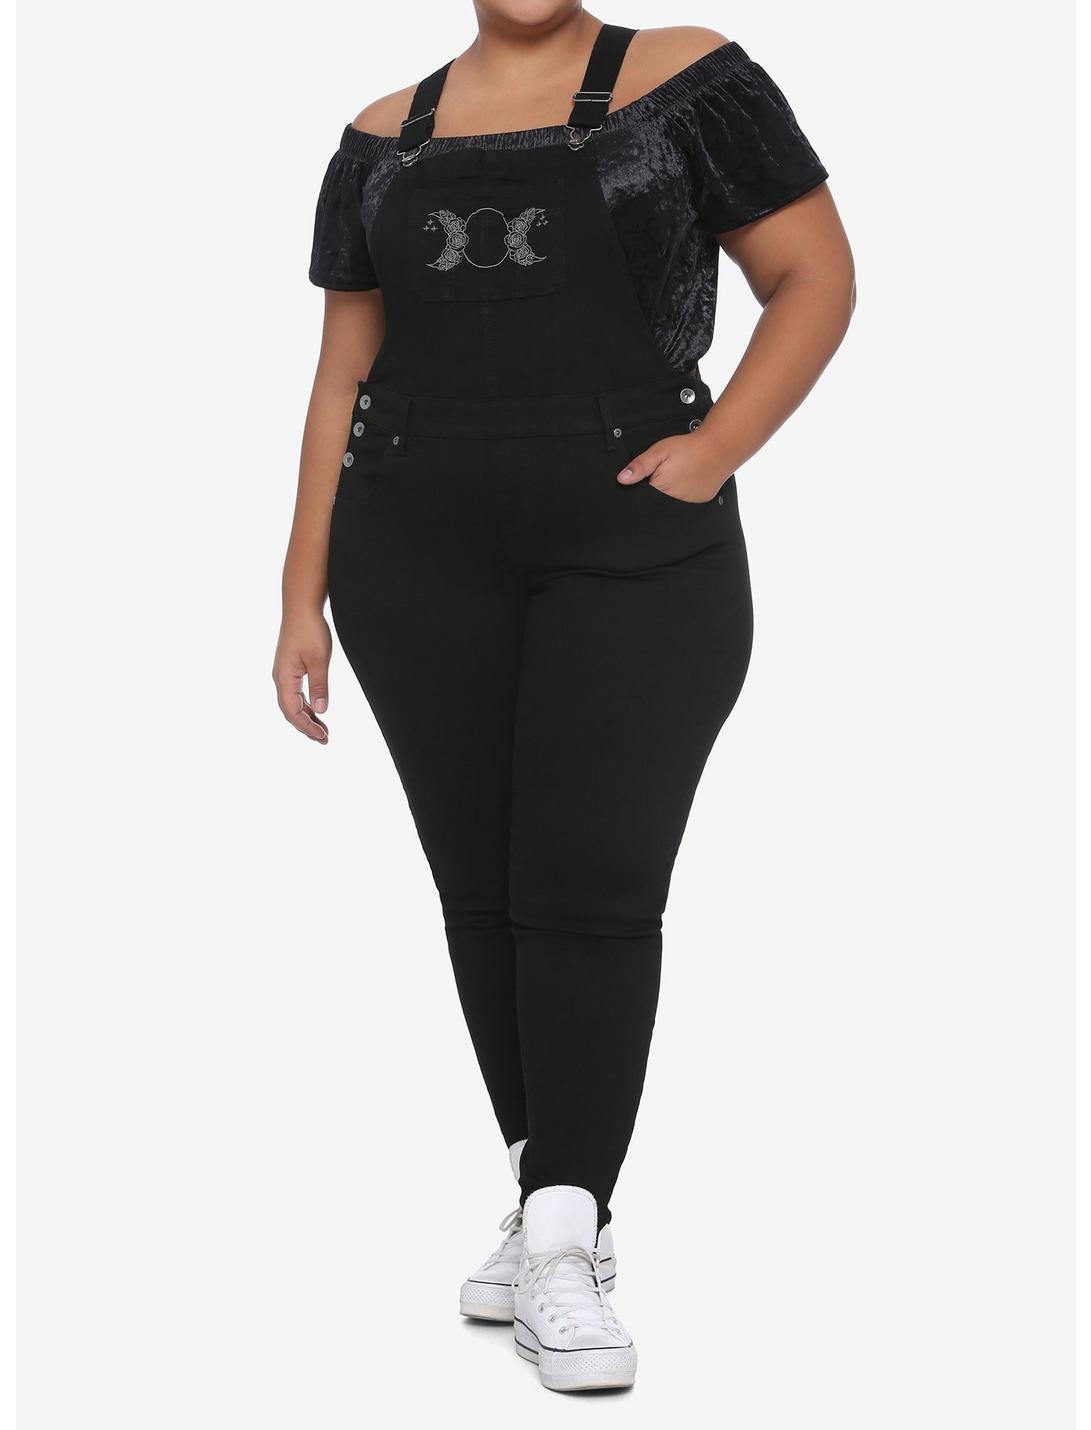 Moon Embroidery Overalls Plus Size, BLACK, hi-res